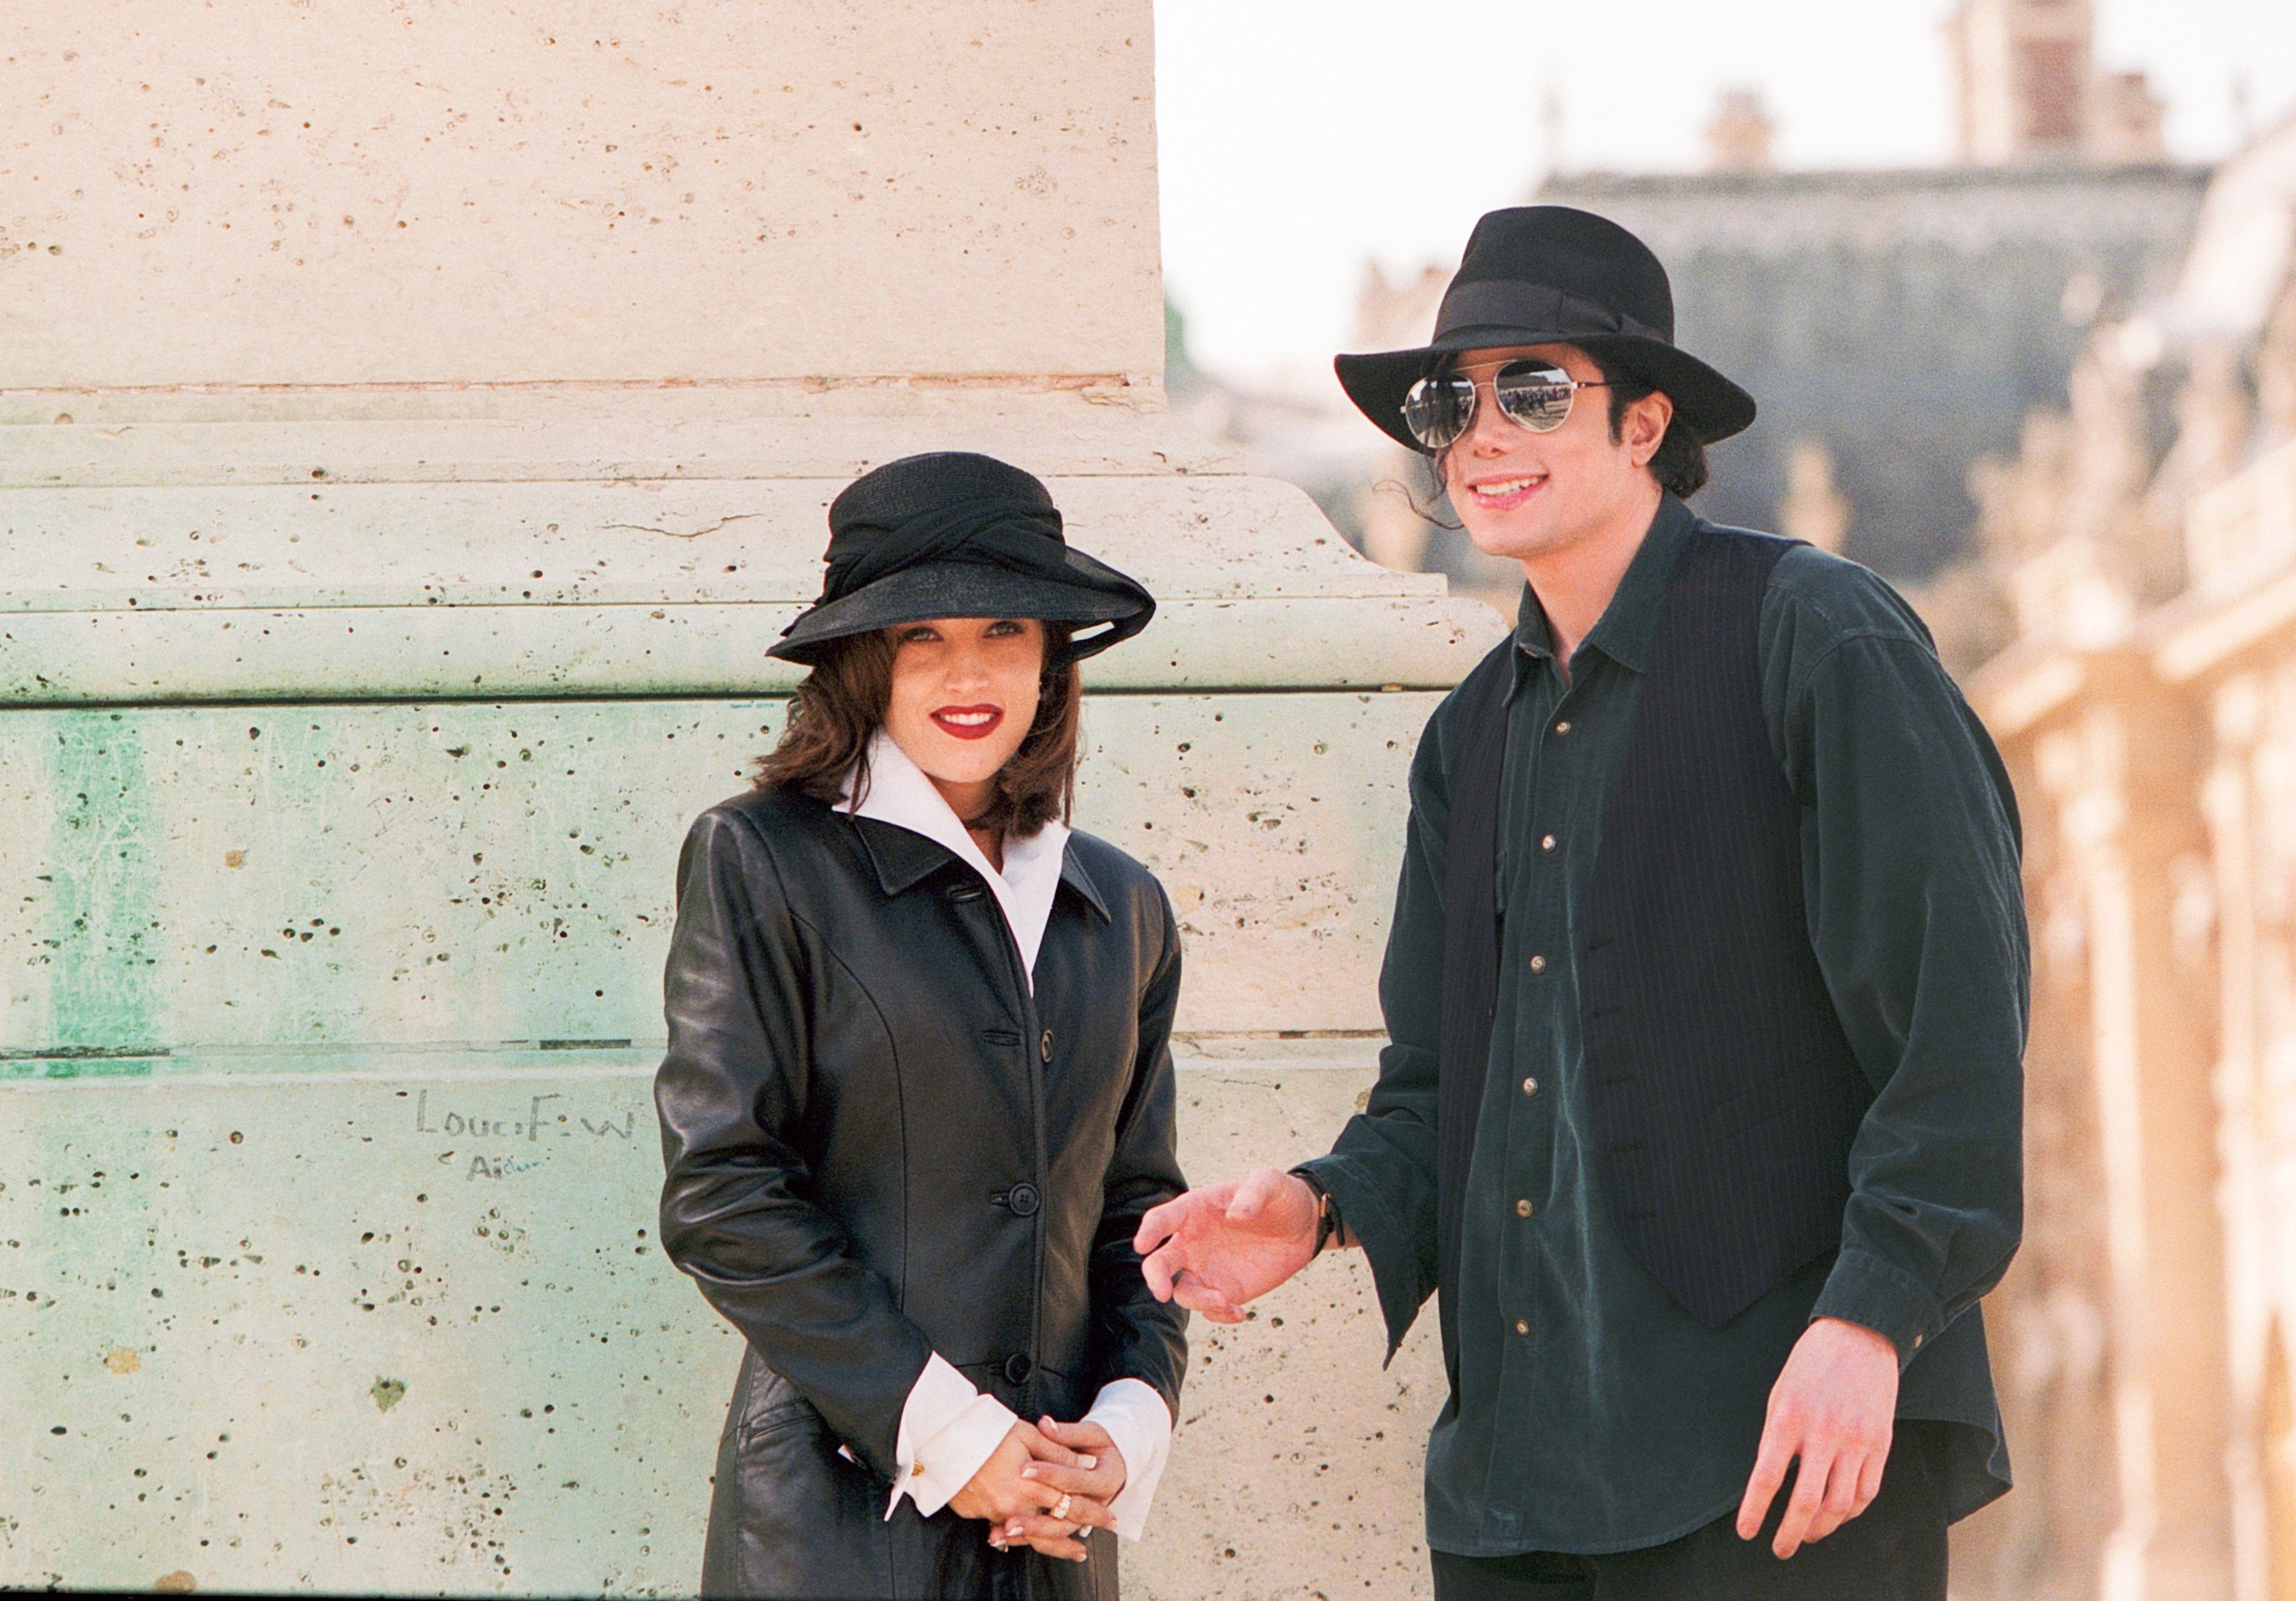 Lisa Marie Presley and Michael Jackson pose at the "Chateau de Versailles" on September 5, 1994 in Versailles, France. | Source: Getty Images